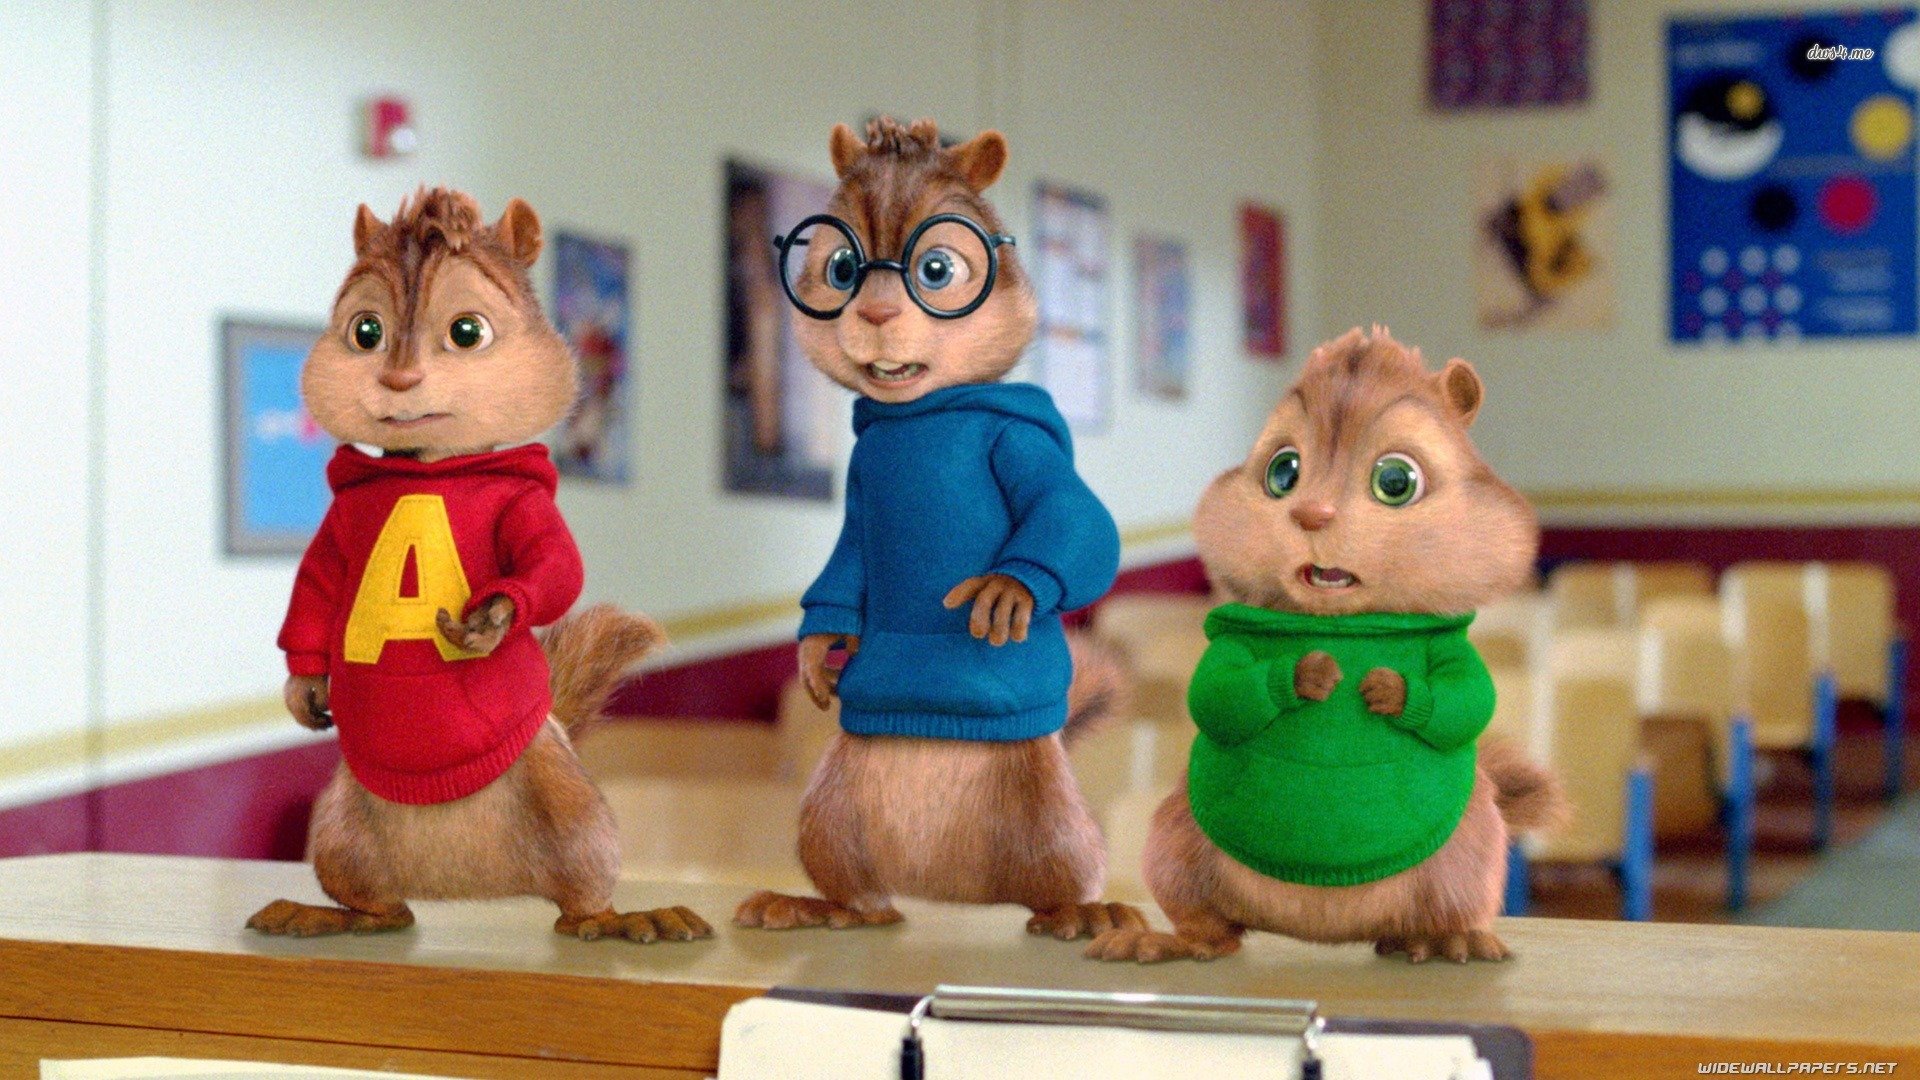 Download full hd 1920x1080 Alvin And The Chipmunks desktop wallpaper ID:83229 for free